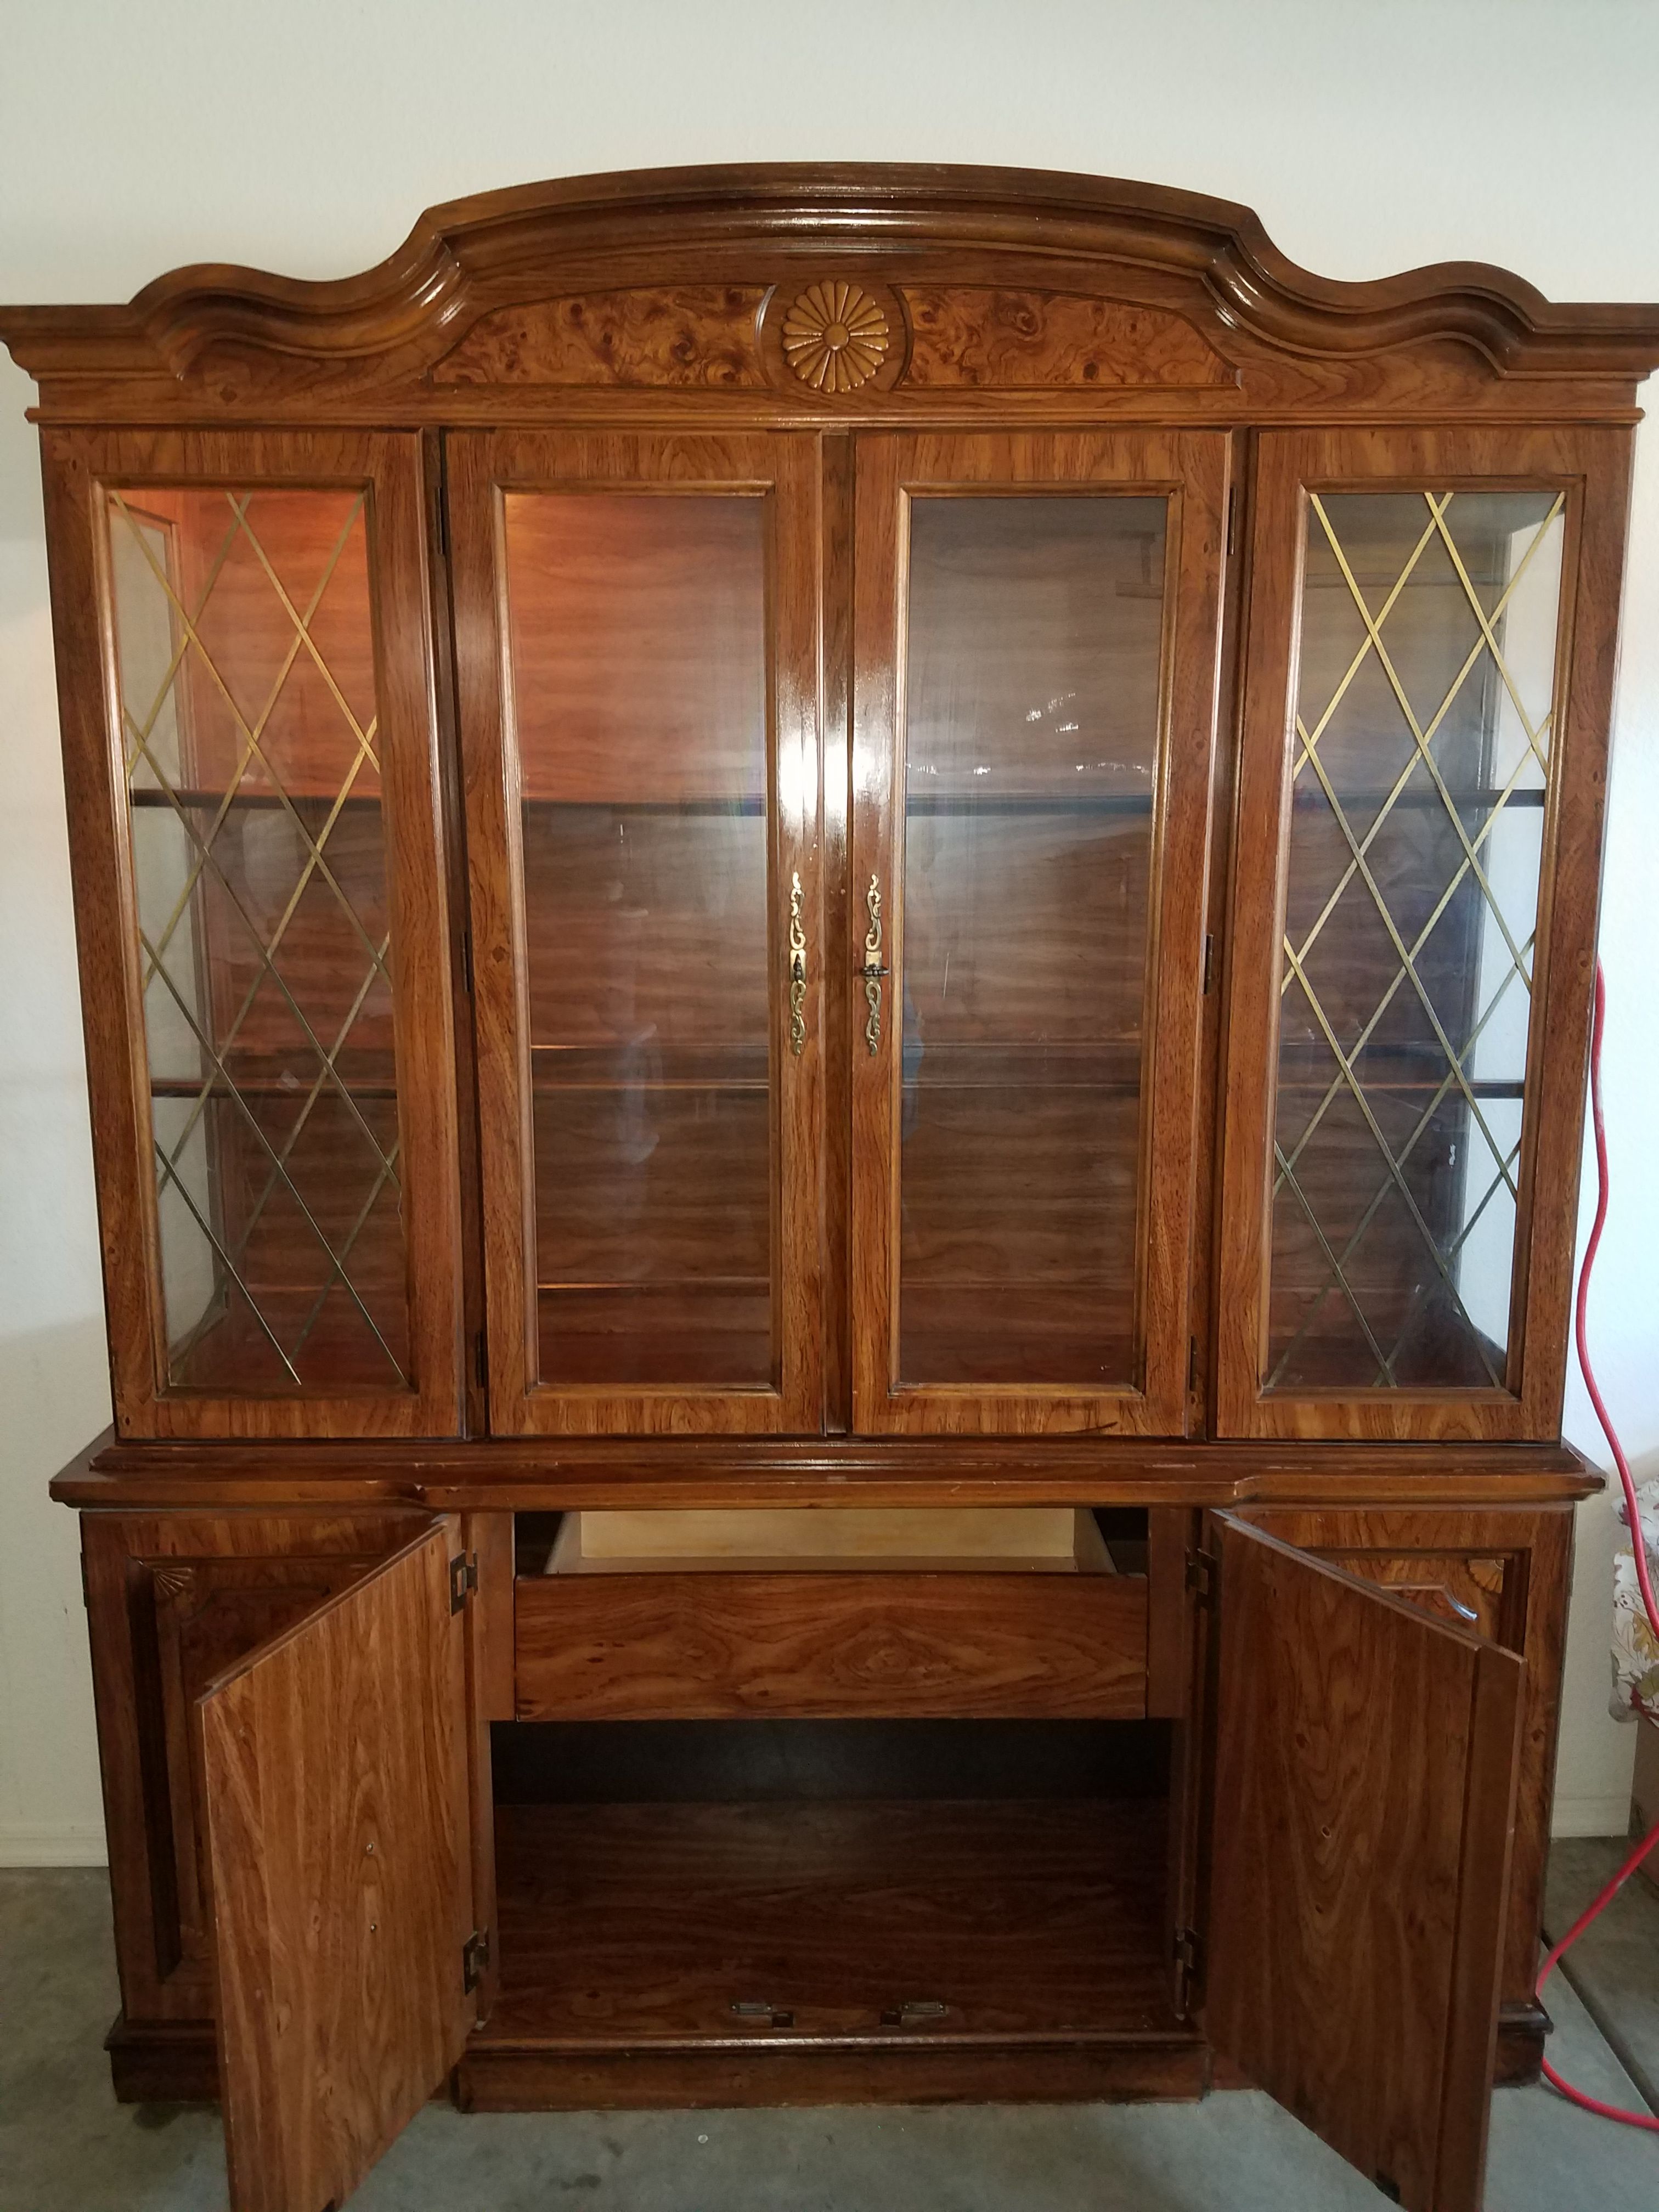 Antique china cabinet with lighting